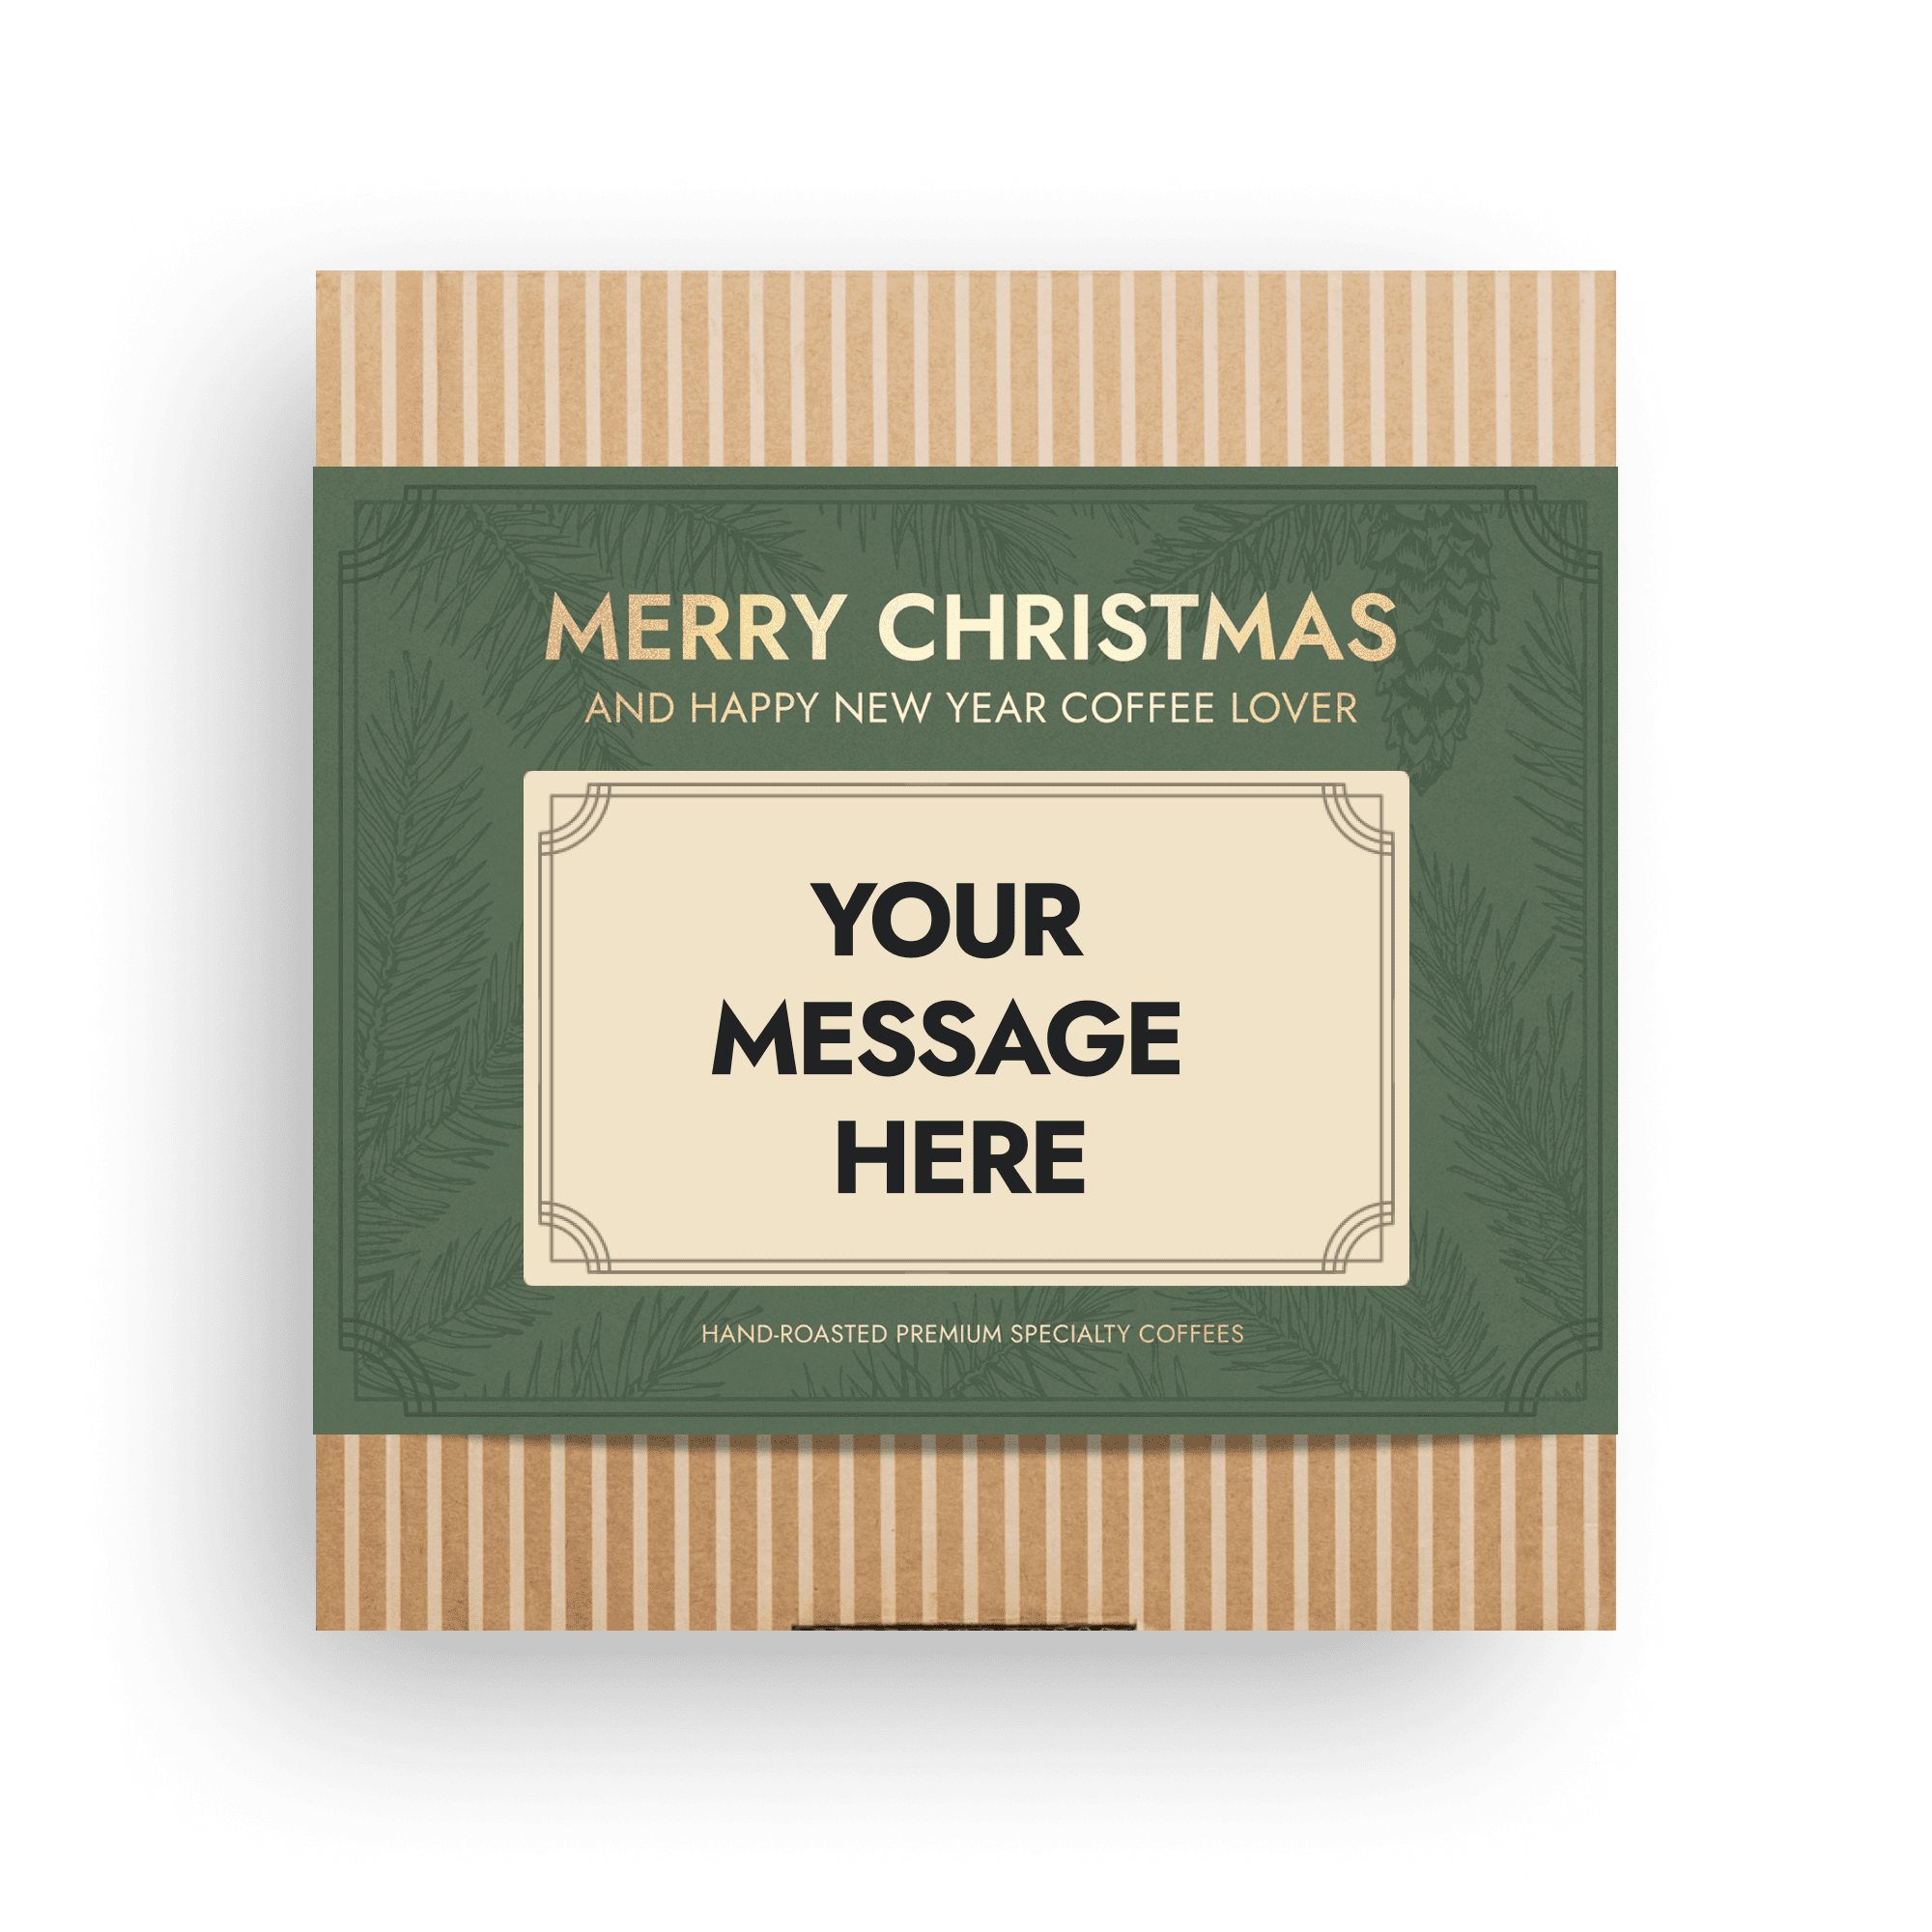 PERSONALIZED COFFEEBREWER CHRISTMAS GIFT Gift Boxes The Brew Company